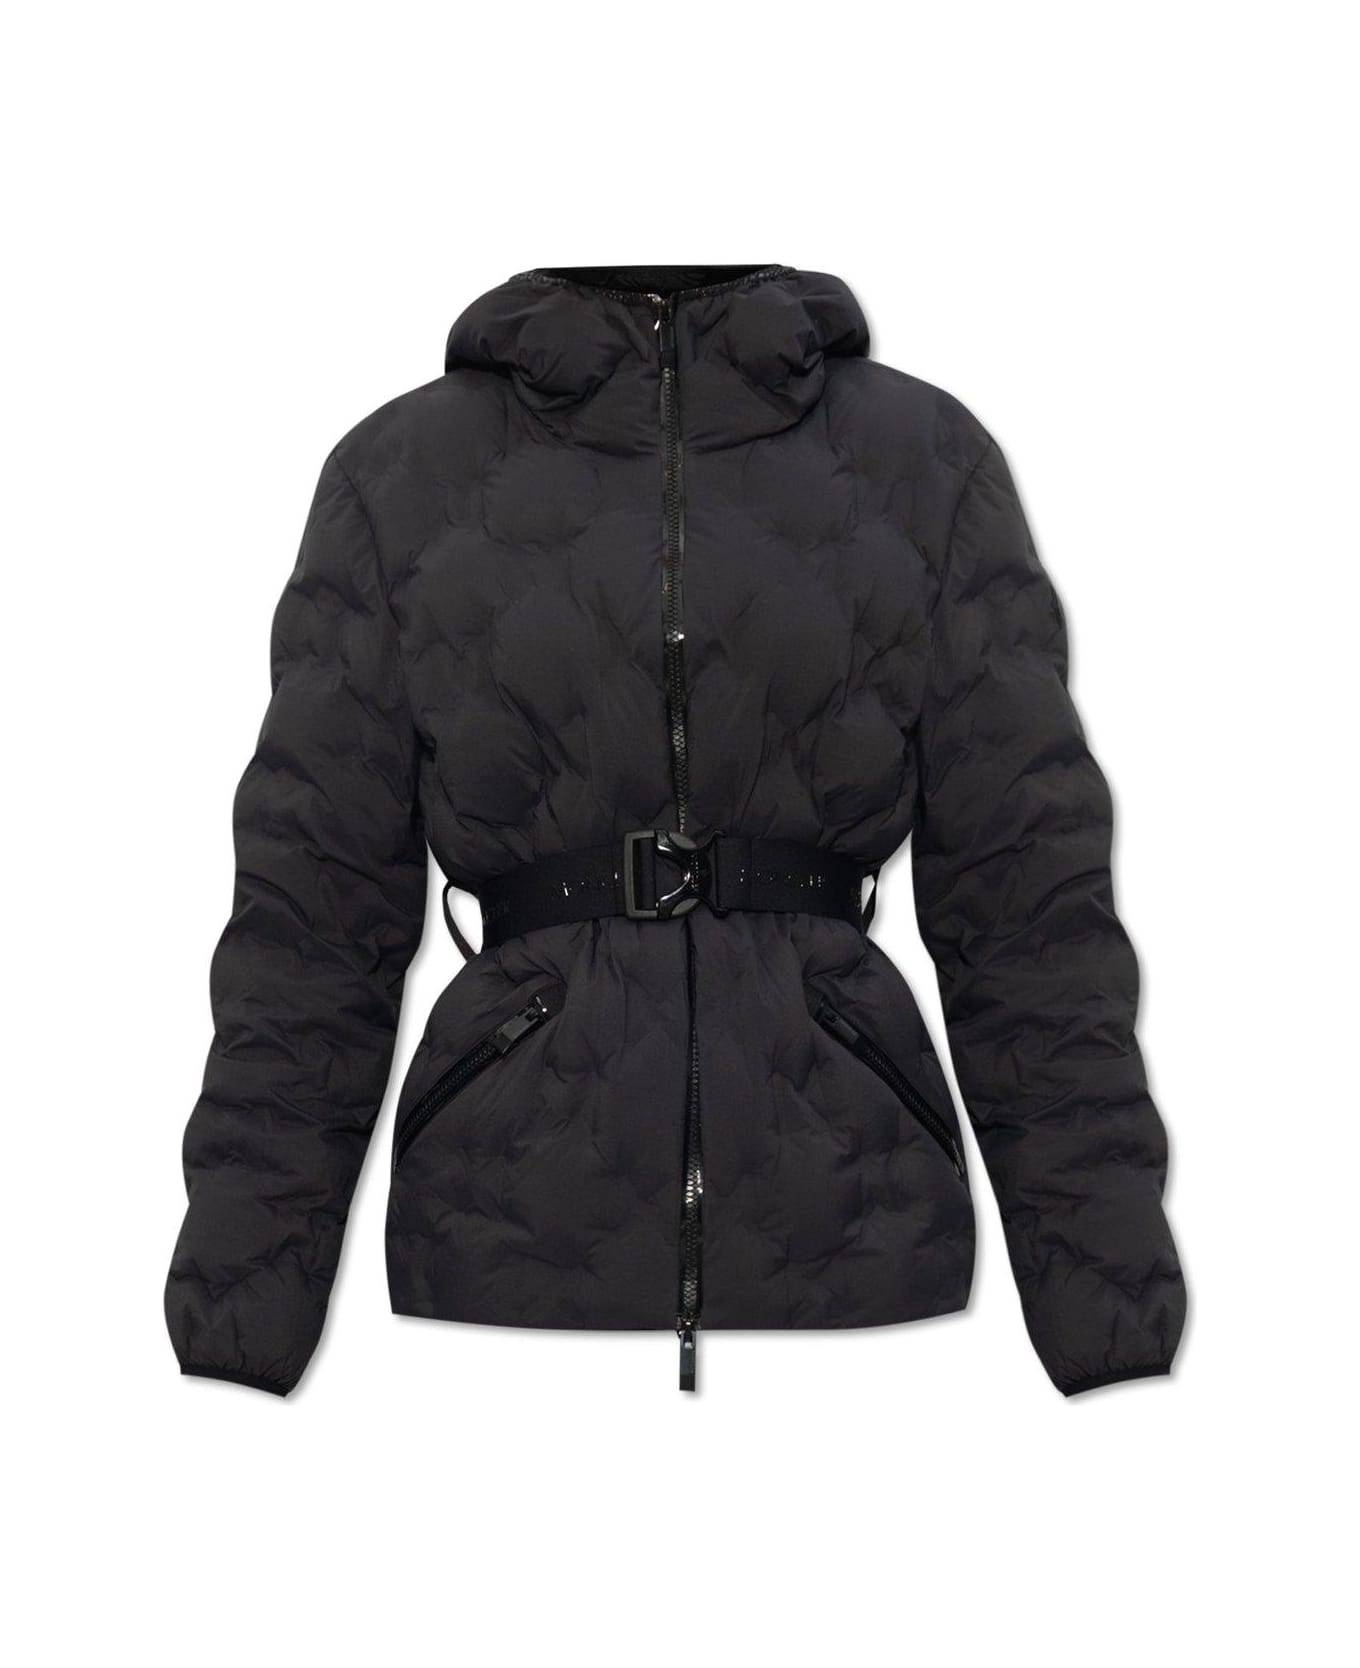 Moncler Adonis Quilted Jacket - Black ダウンジャケット